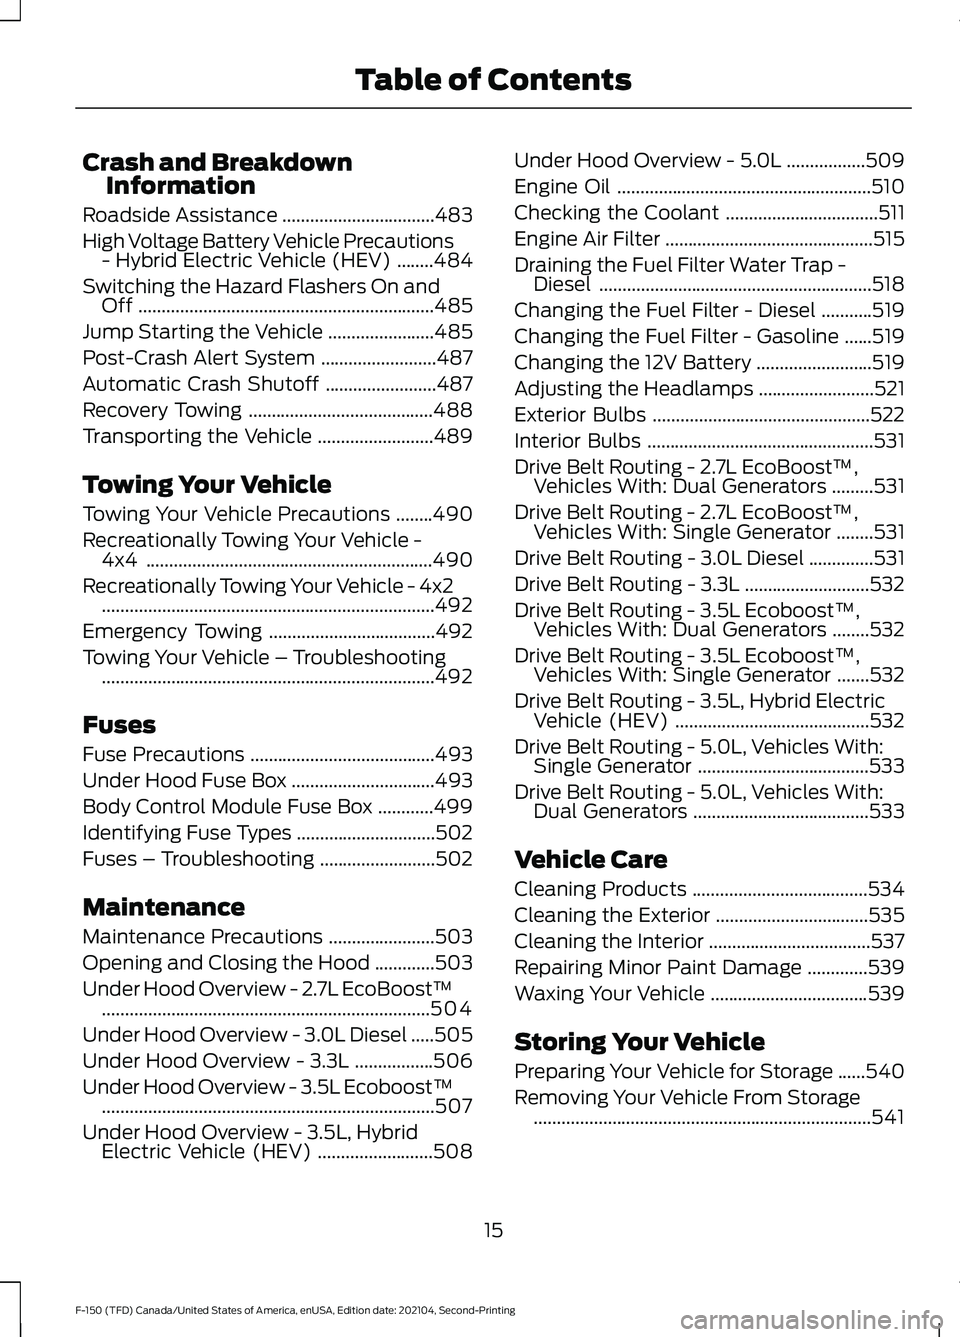 FORD F-150 2021  Owners Manual Crash and Breakdown
Information
Roadside Assistance .................................483
High Voltage Battery Vehicle Precautions - Hybrid Electric Vehicle (HEV) ........
484
Switching the Hazard Flas